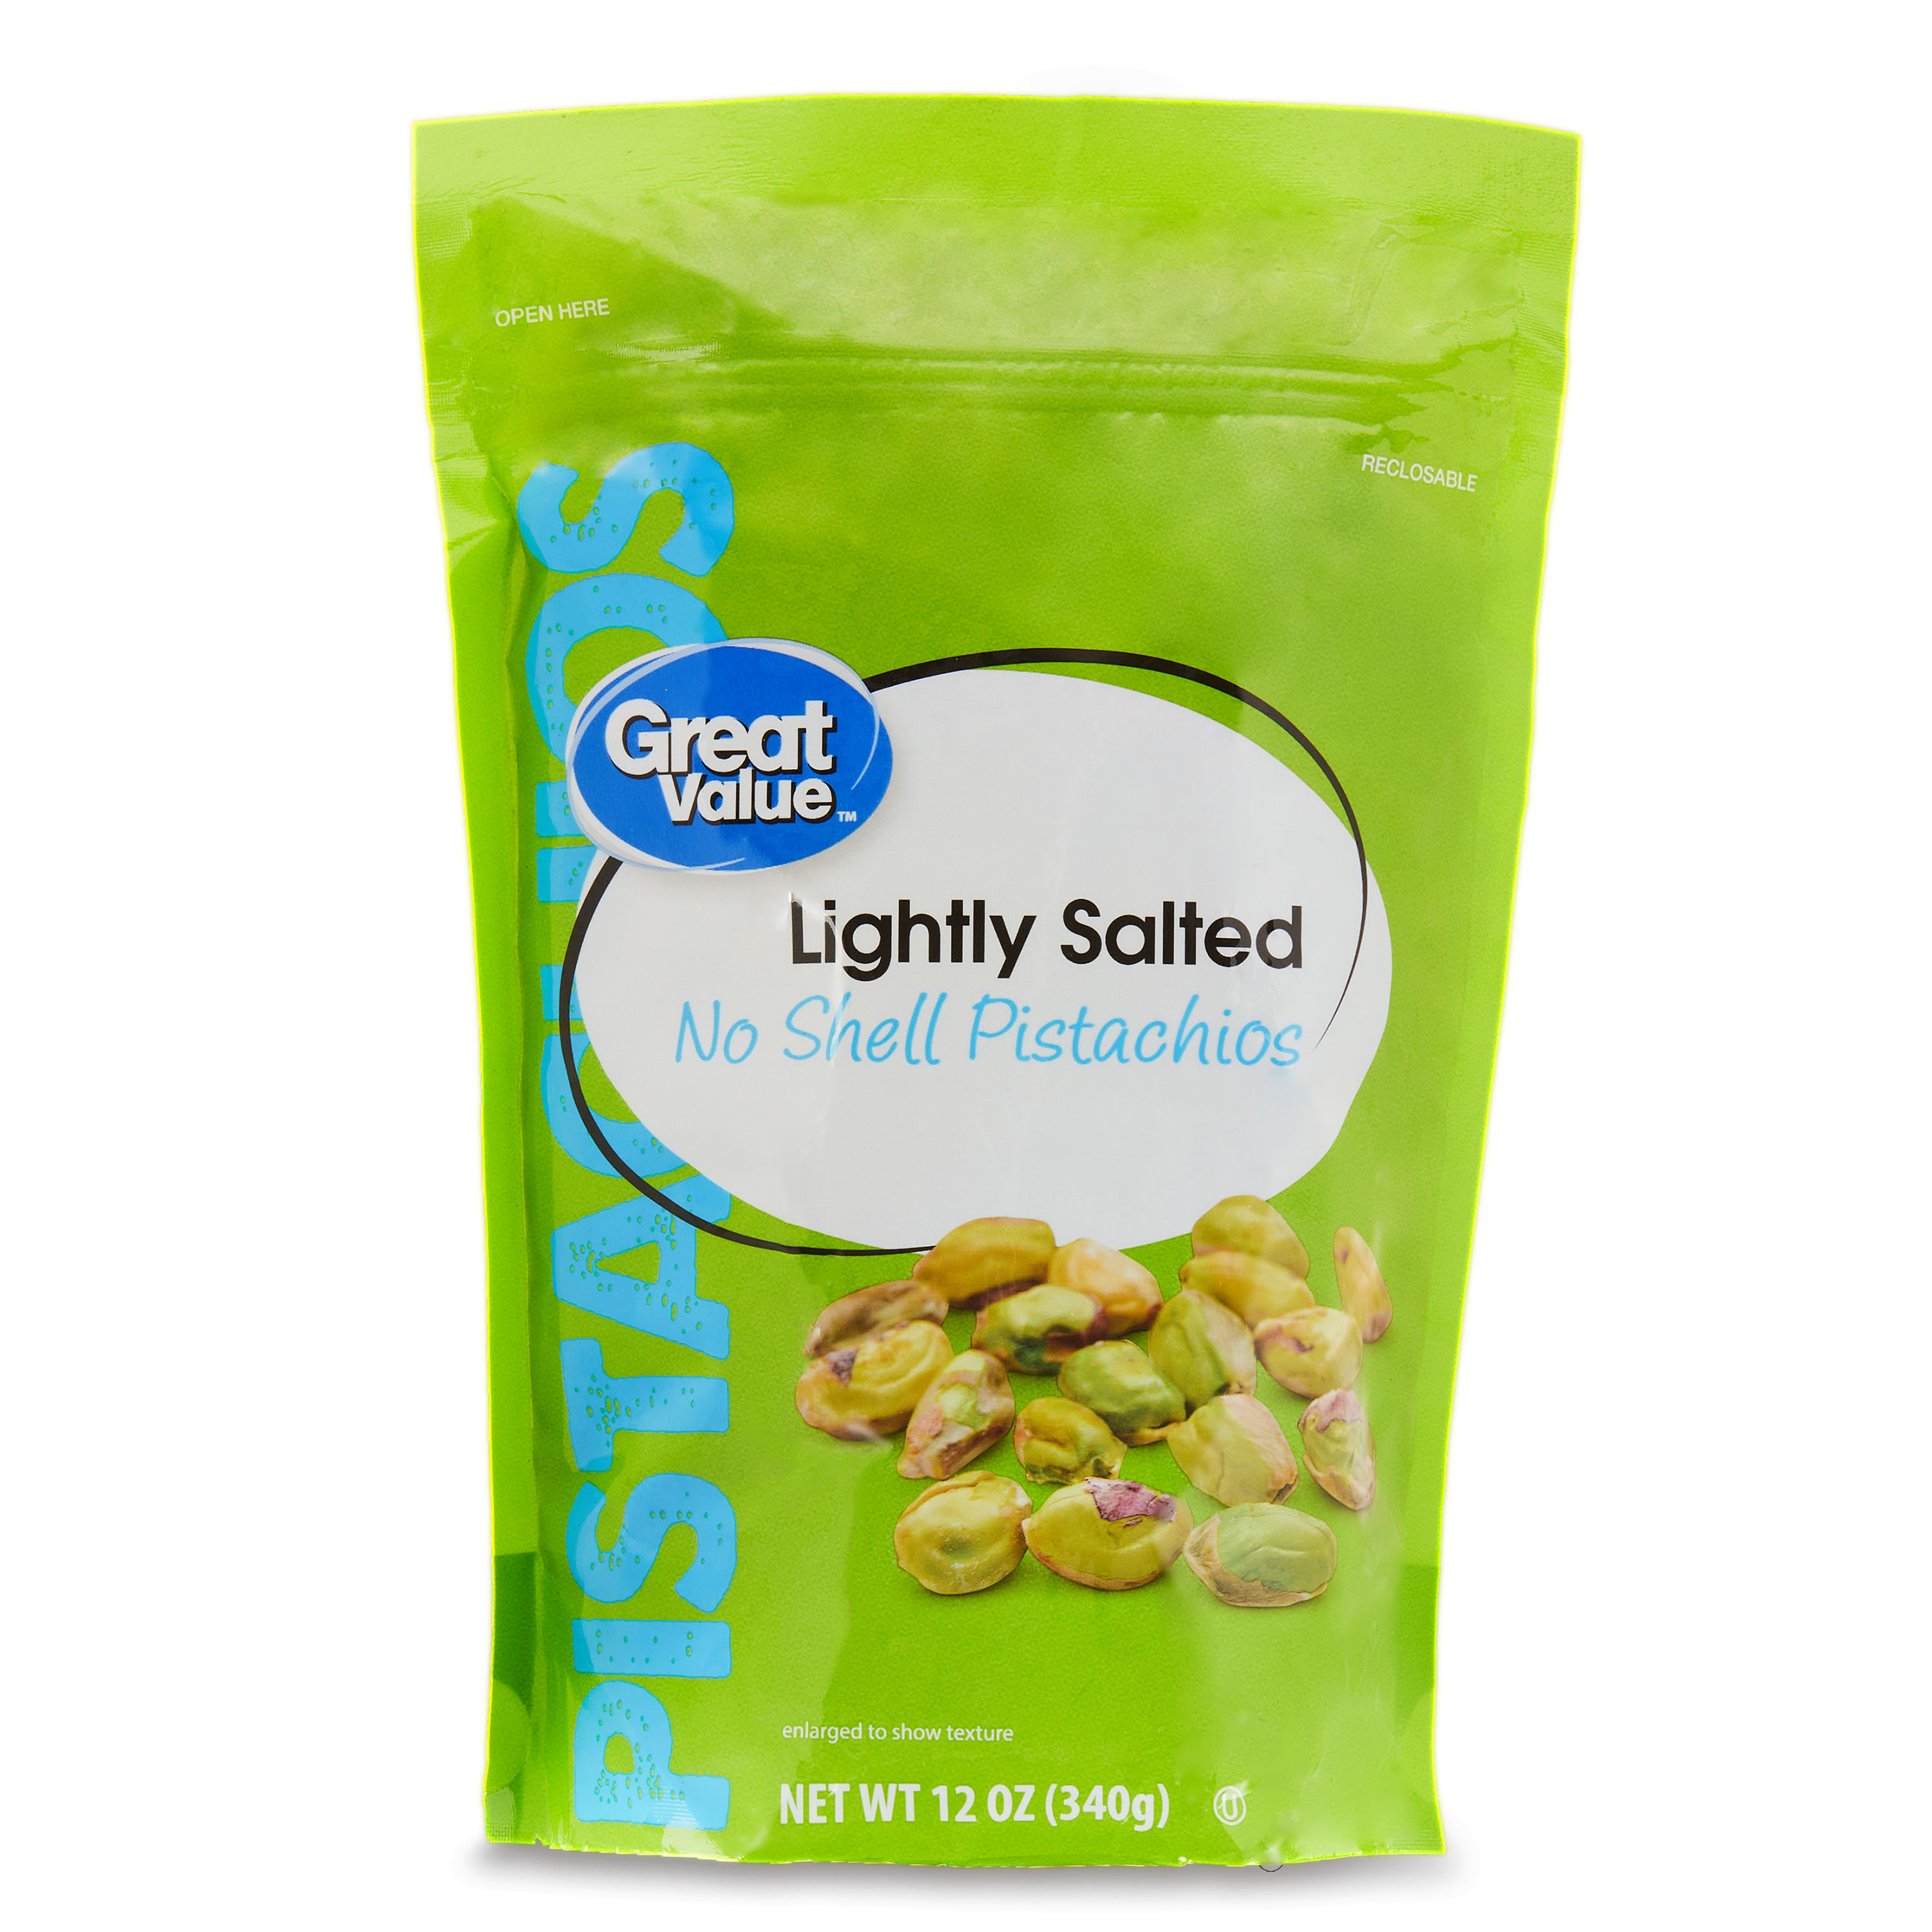 Great Value Shelled Pistachios Lightly Salted, 12 oz - image 1 of 8